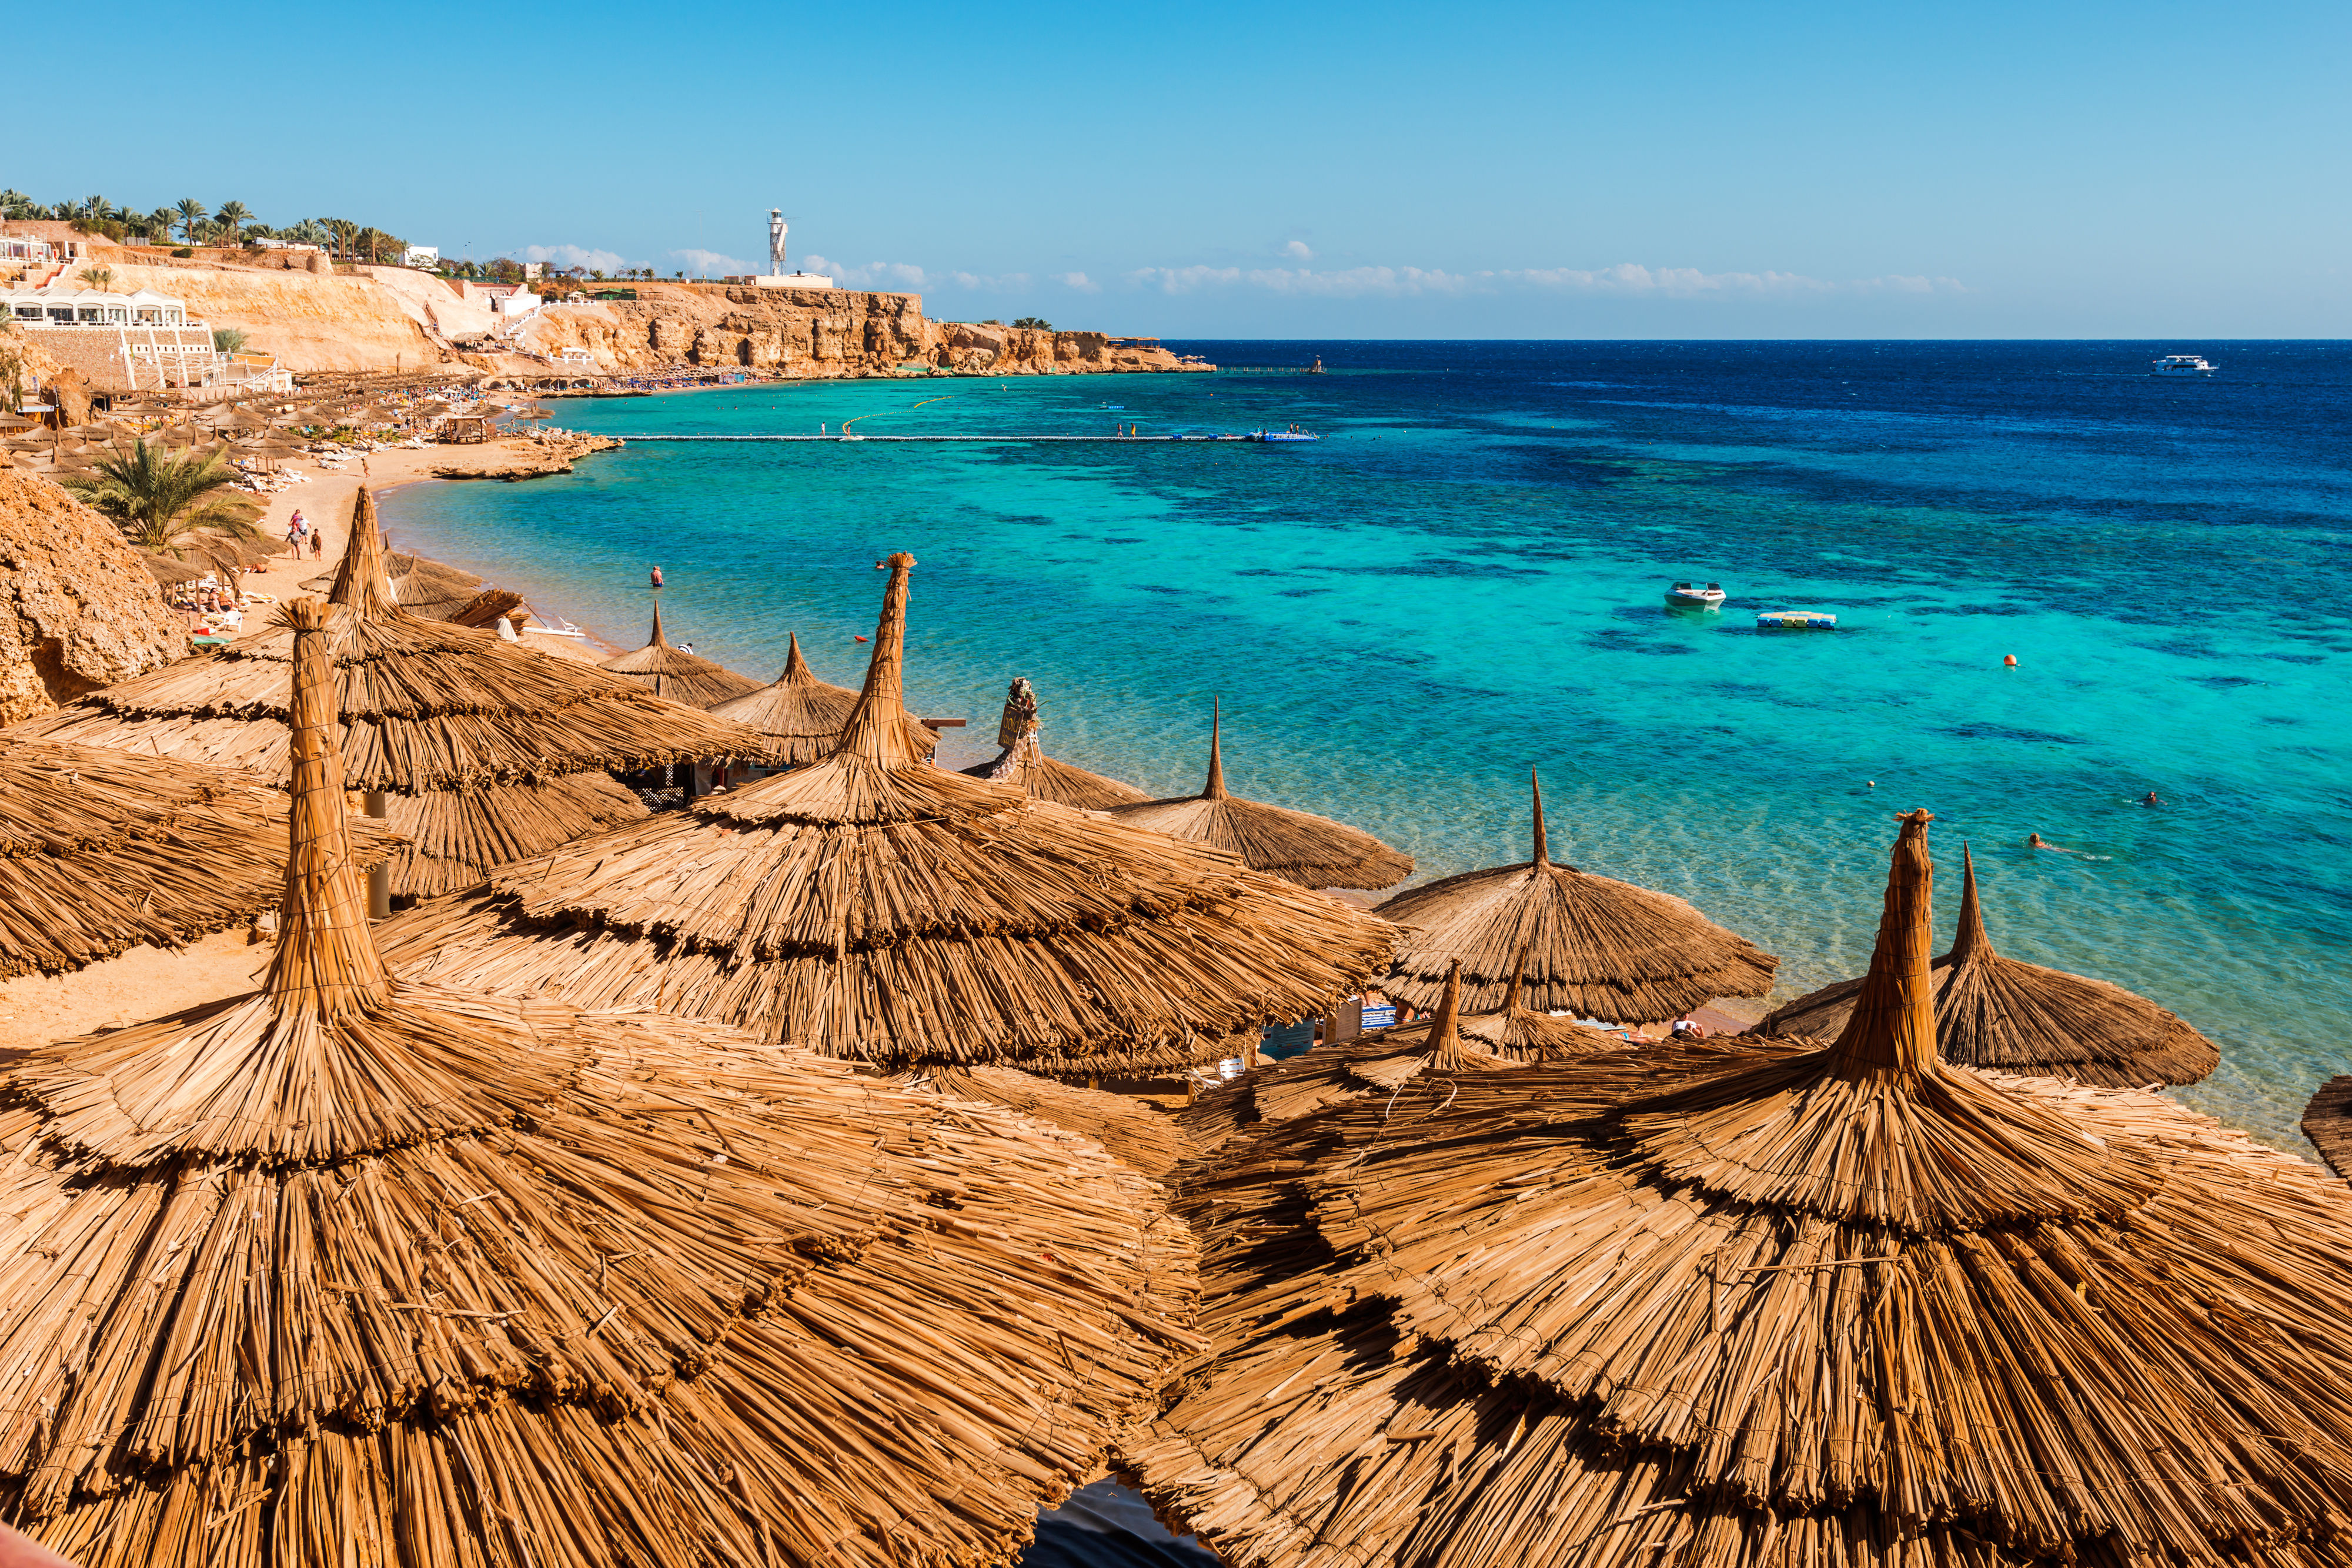 Straw umbrellas along the red sea coast line and shallow reefs of Sinai, Egypt